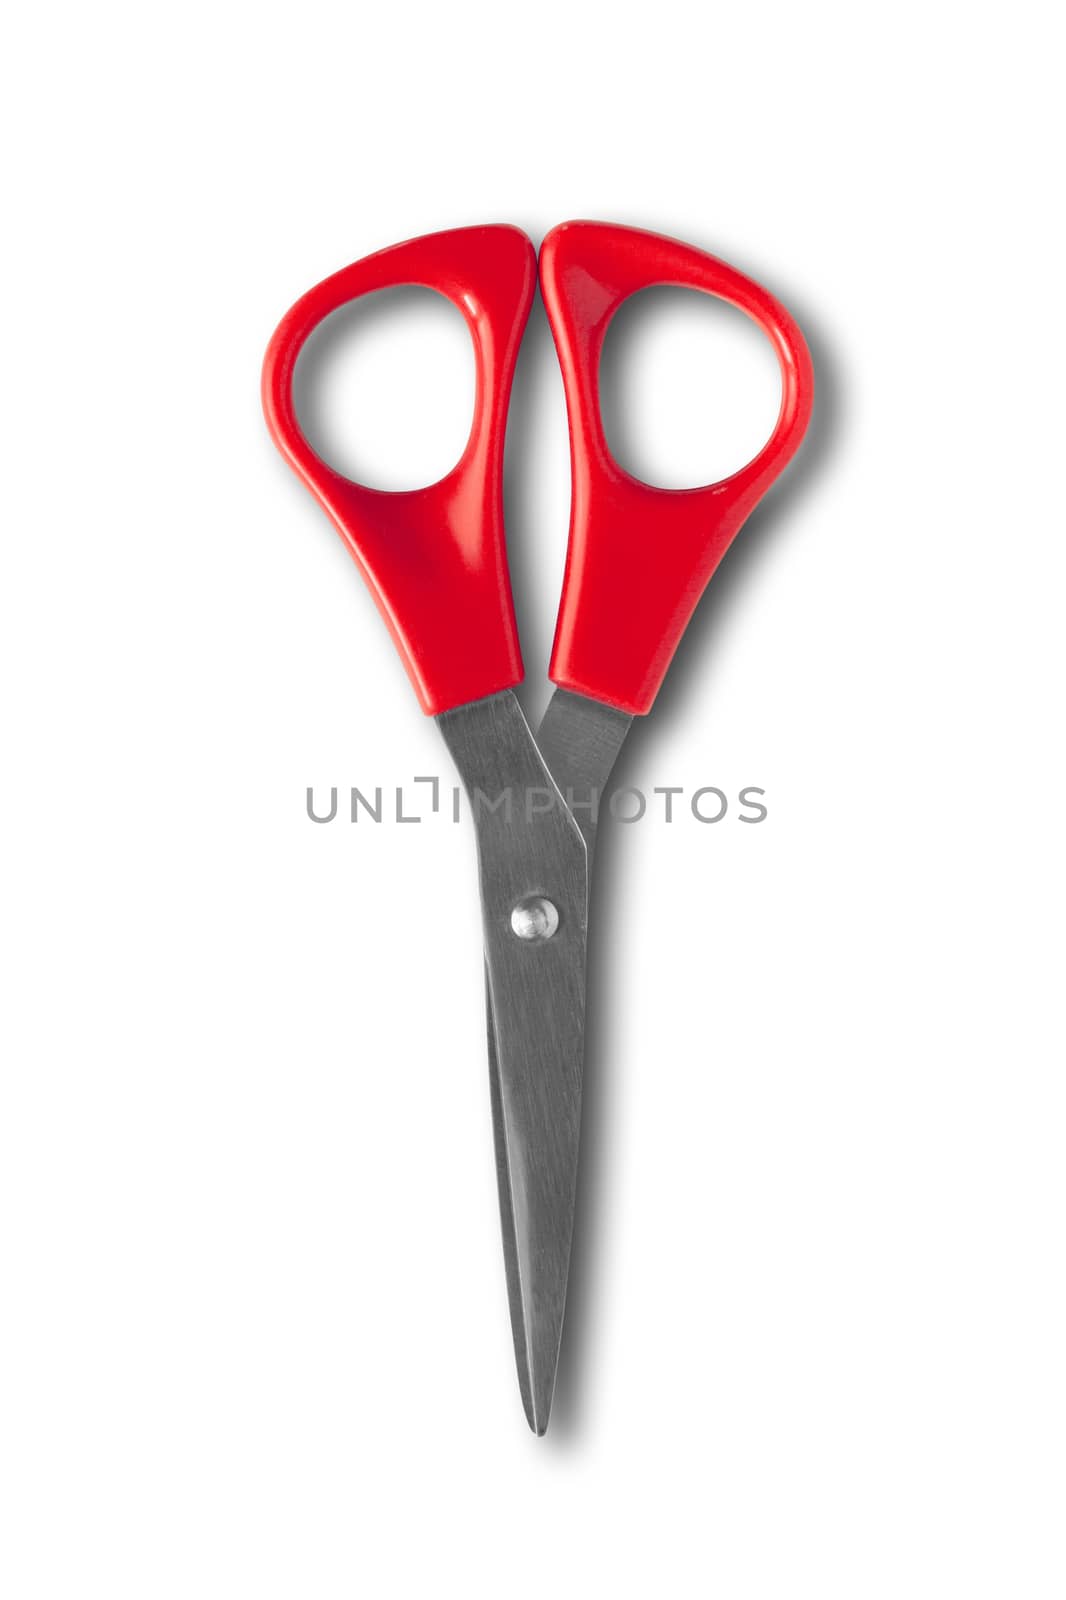 Pair of scissors mockup isolated on white background